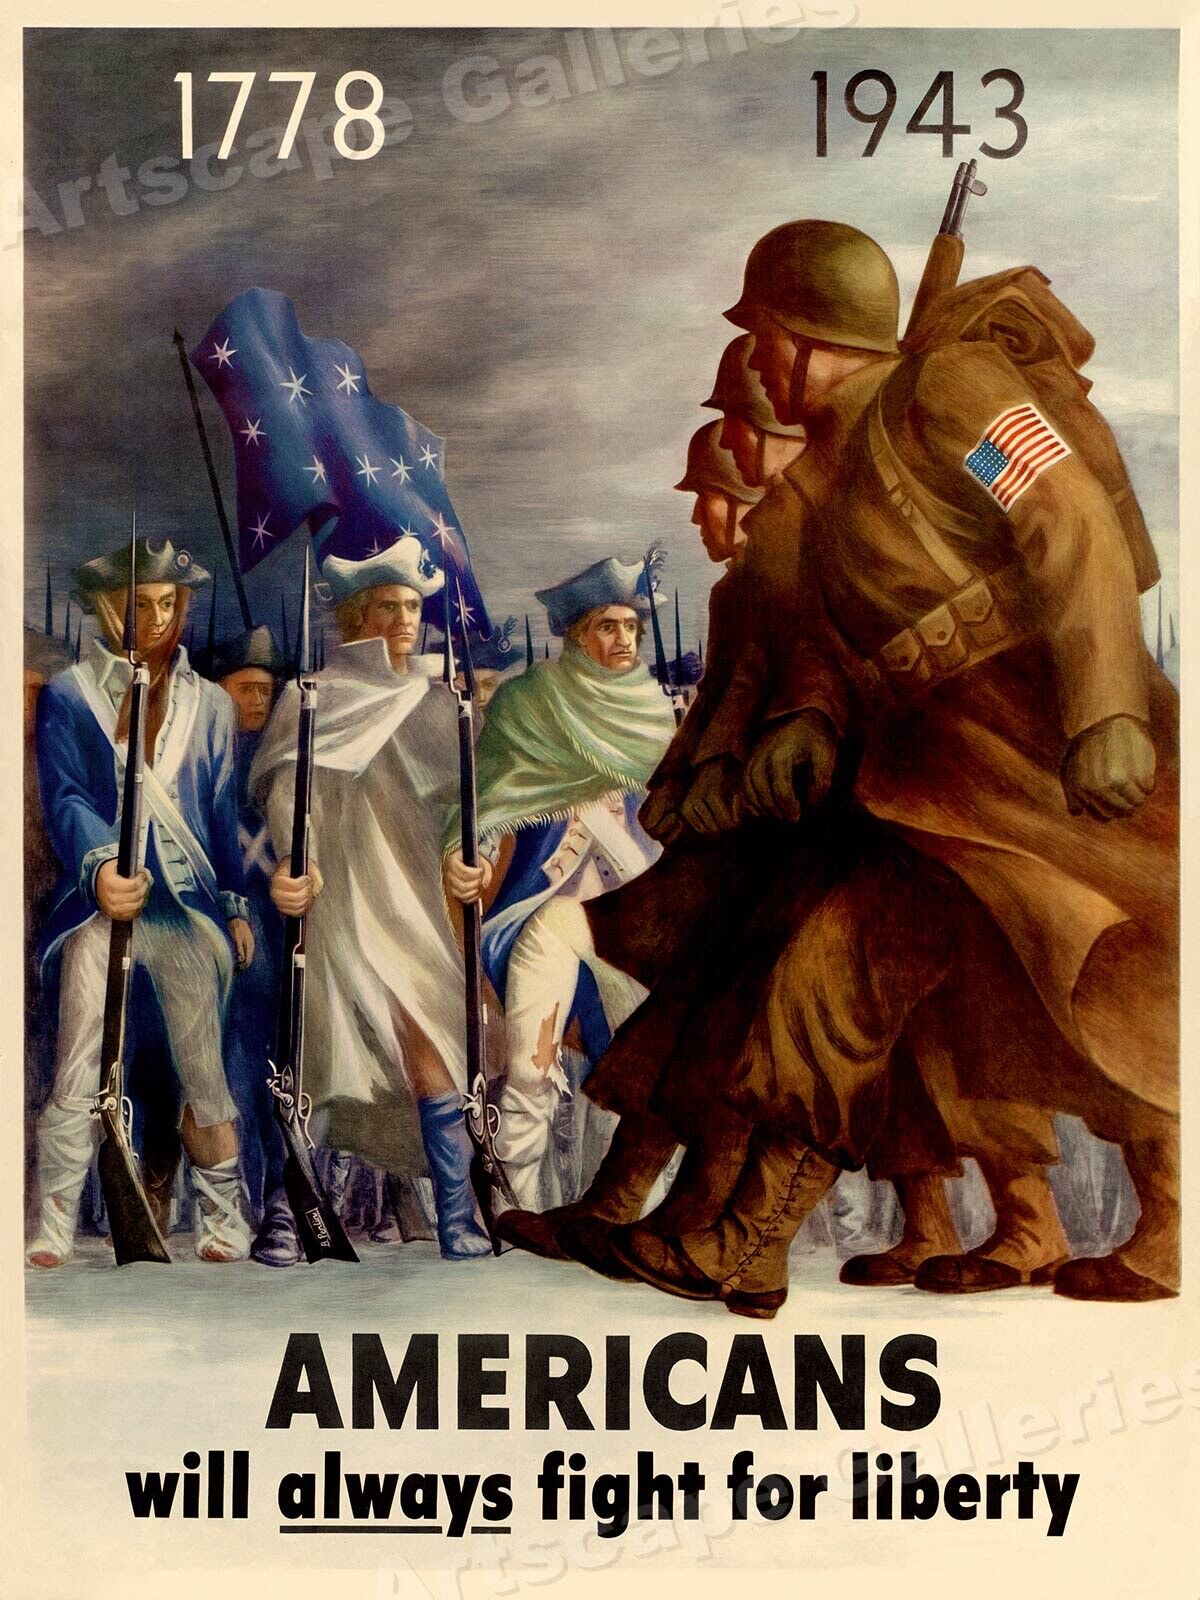 1940s Americans Will Always Fight For Liberty - WWII US Army Poster - 18x24